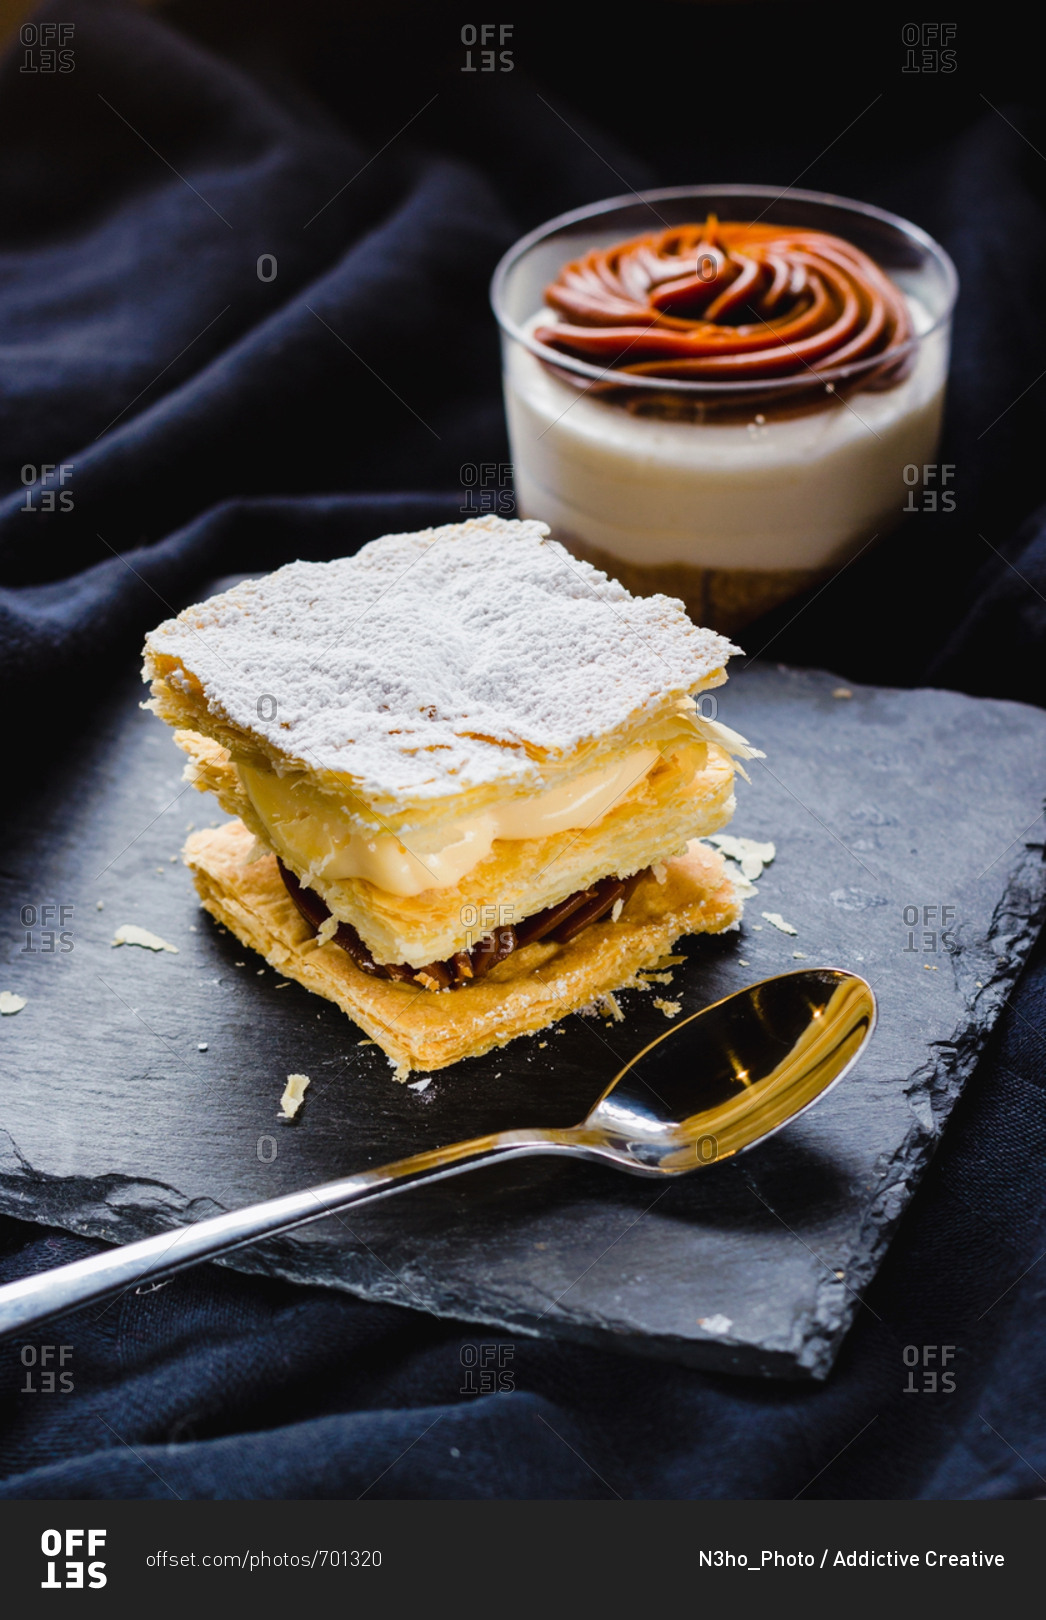 Close-up of puff pastry dessert with creams on plate and dessert in cup composed on soft textile